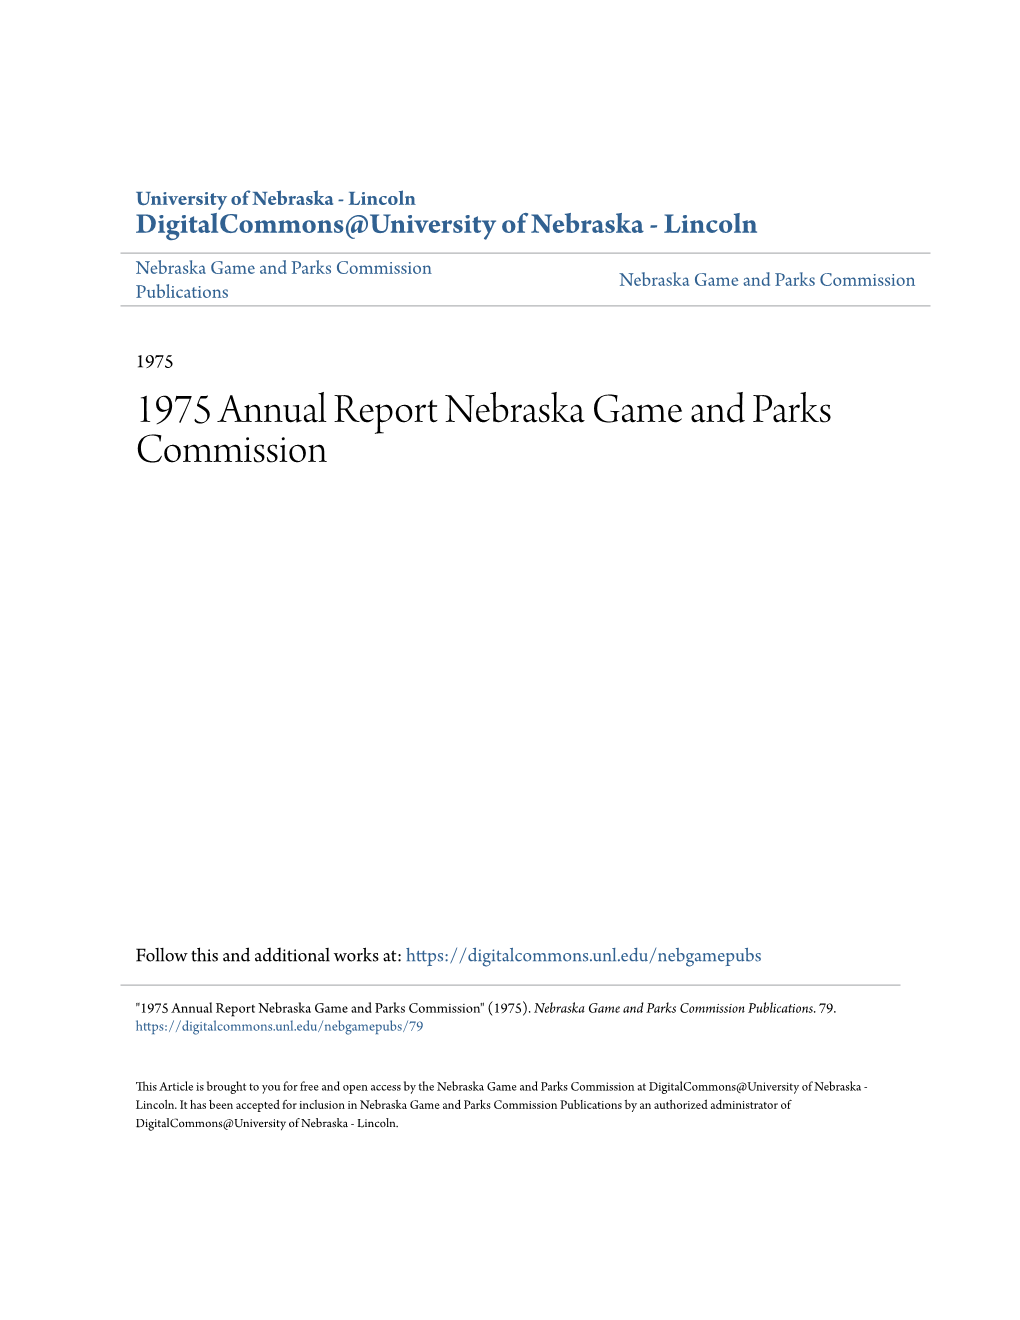 1975 Annual Report Nebraska Game and Parks Commission